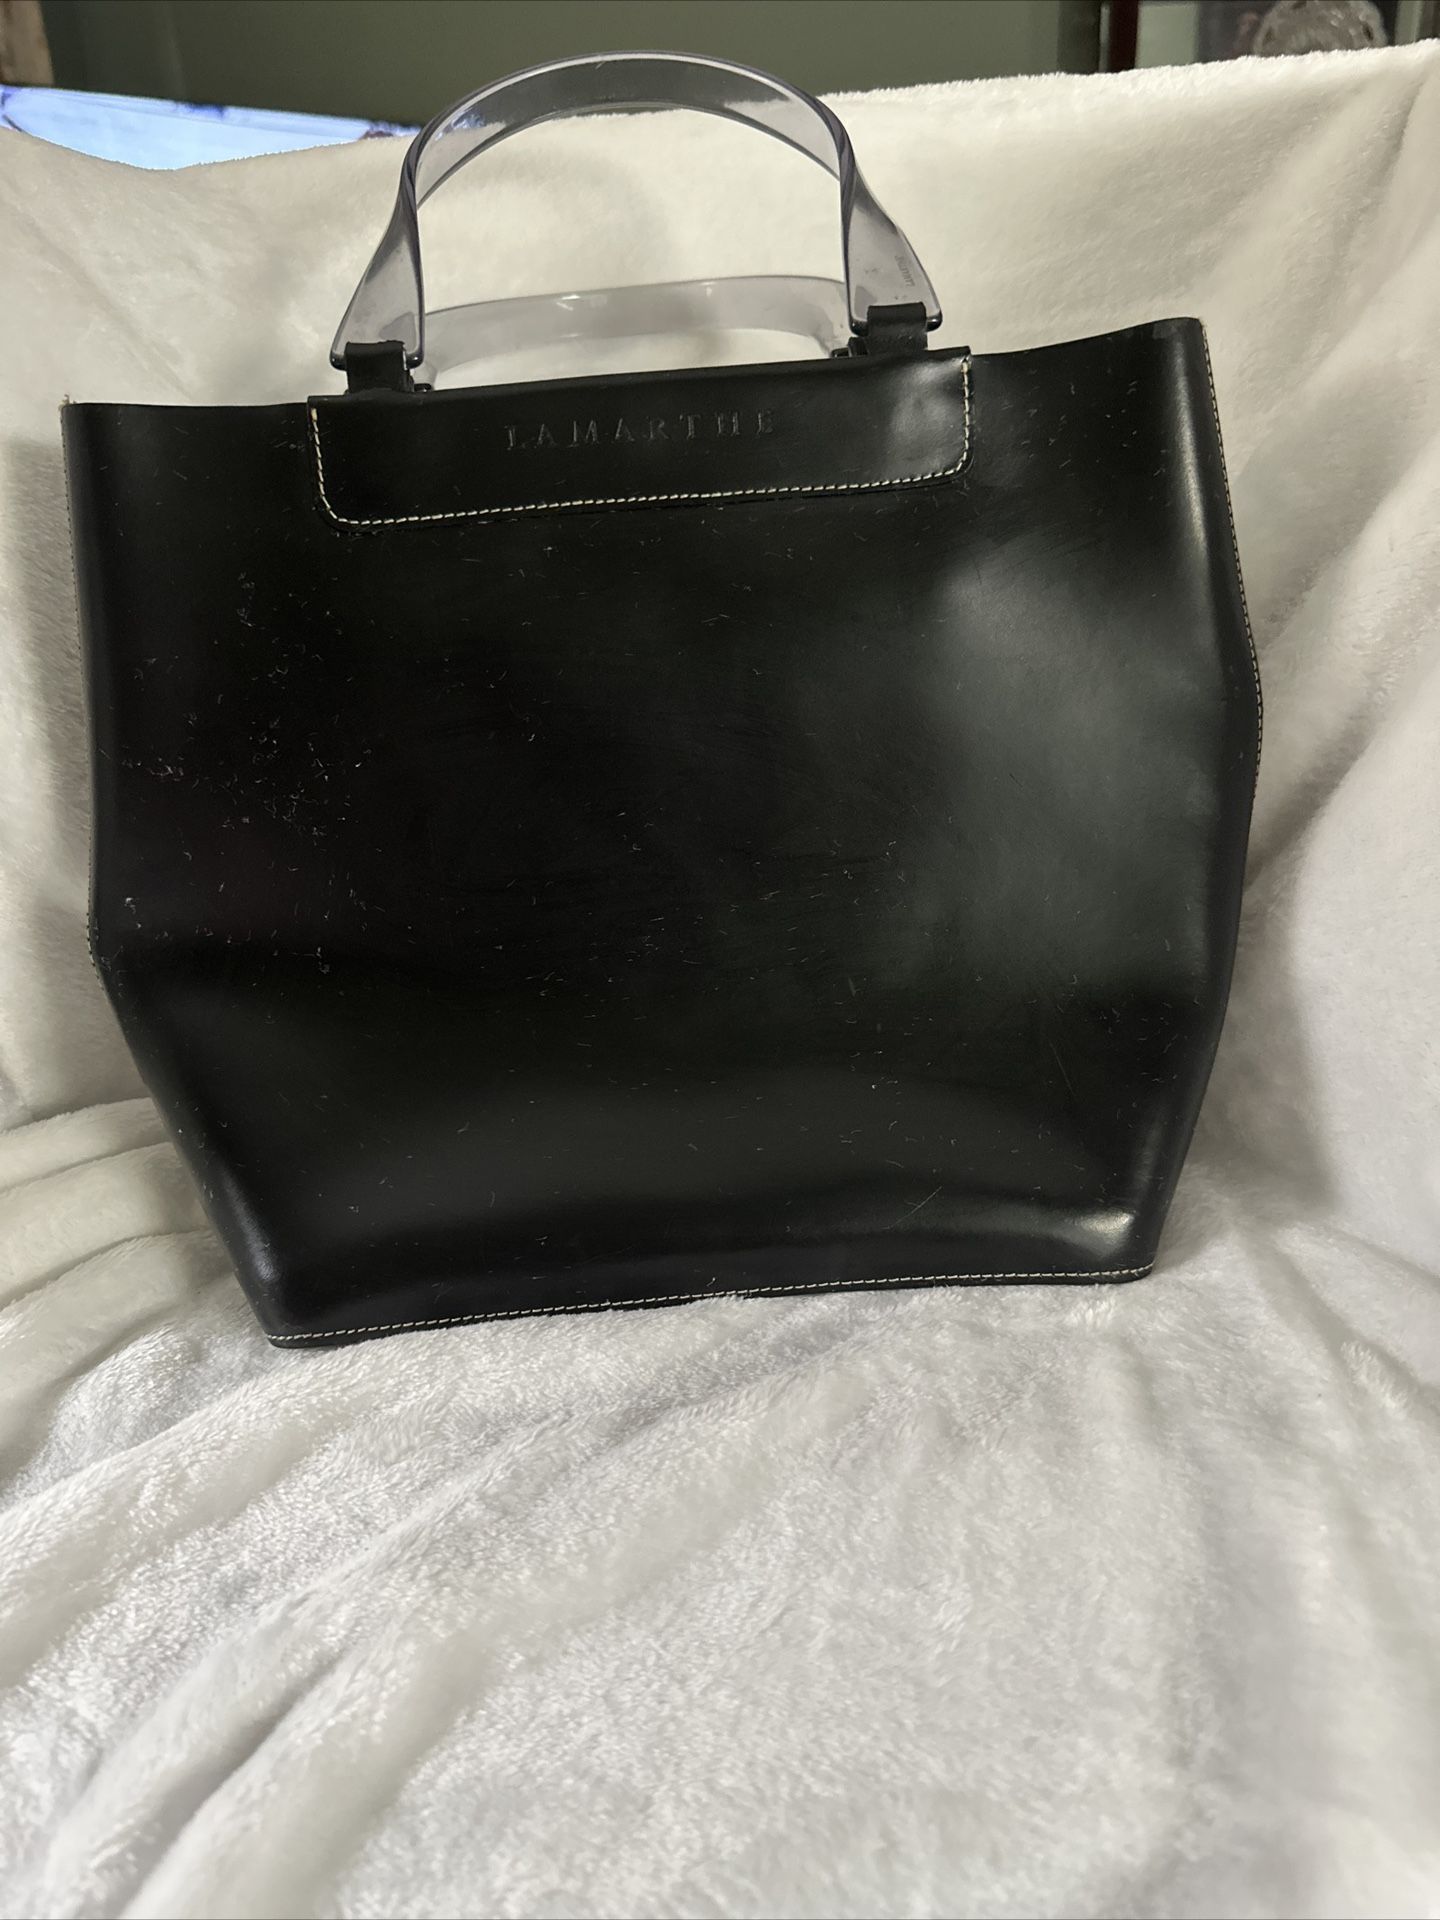 Lamarthe Leather Tote Handbag With Lucite Handles Pristine Condition! Retailed For $300.00 